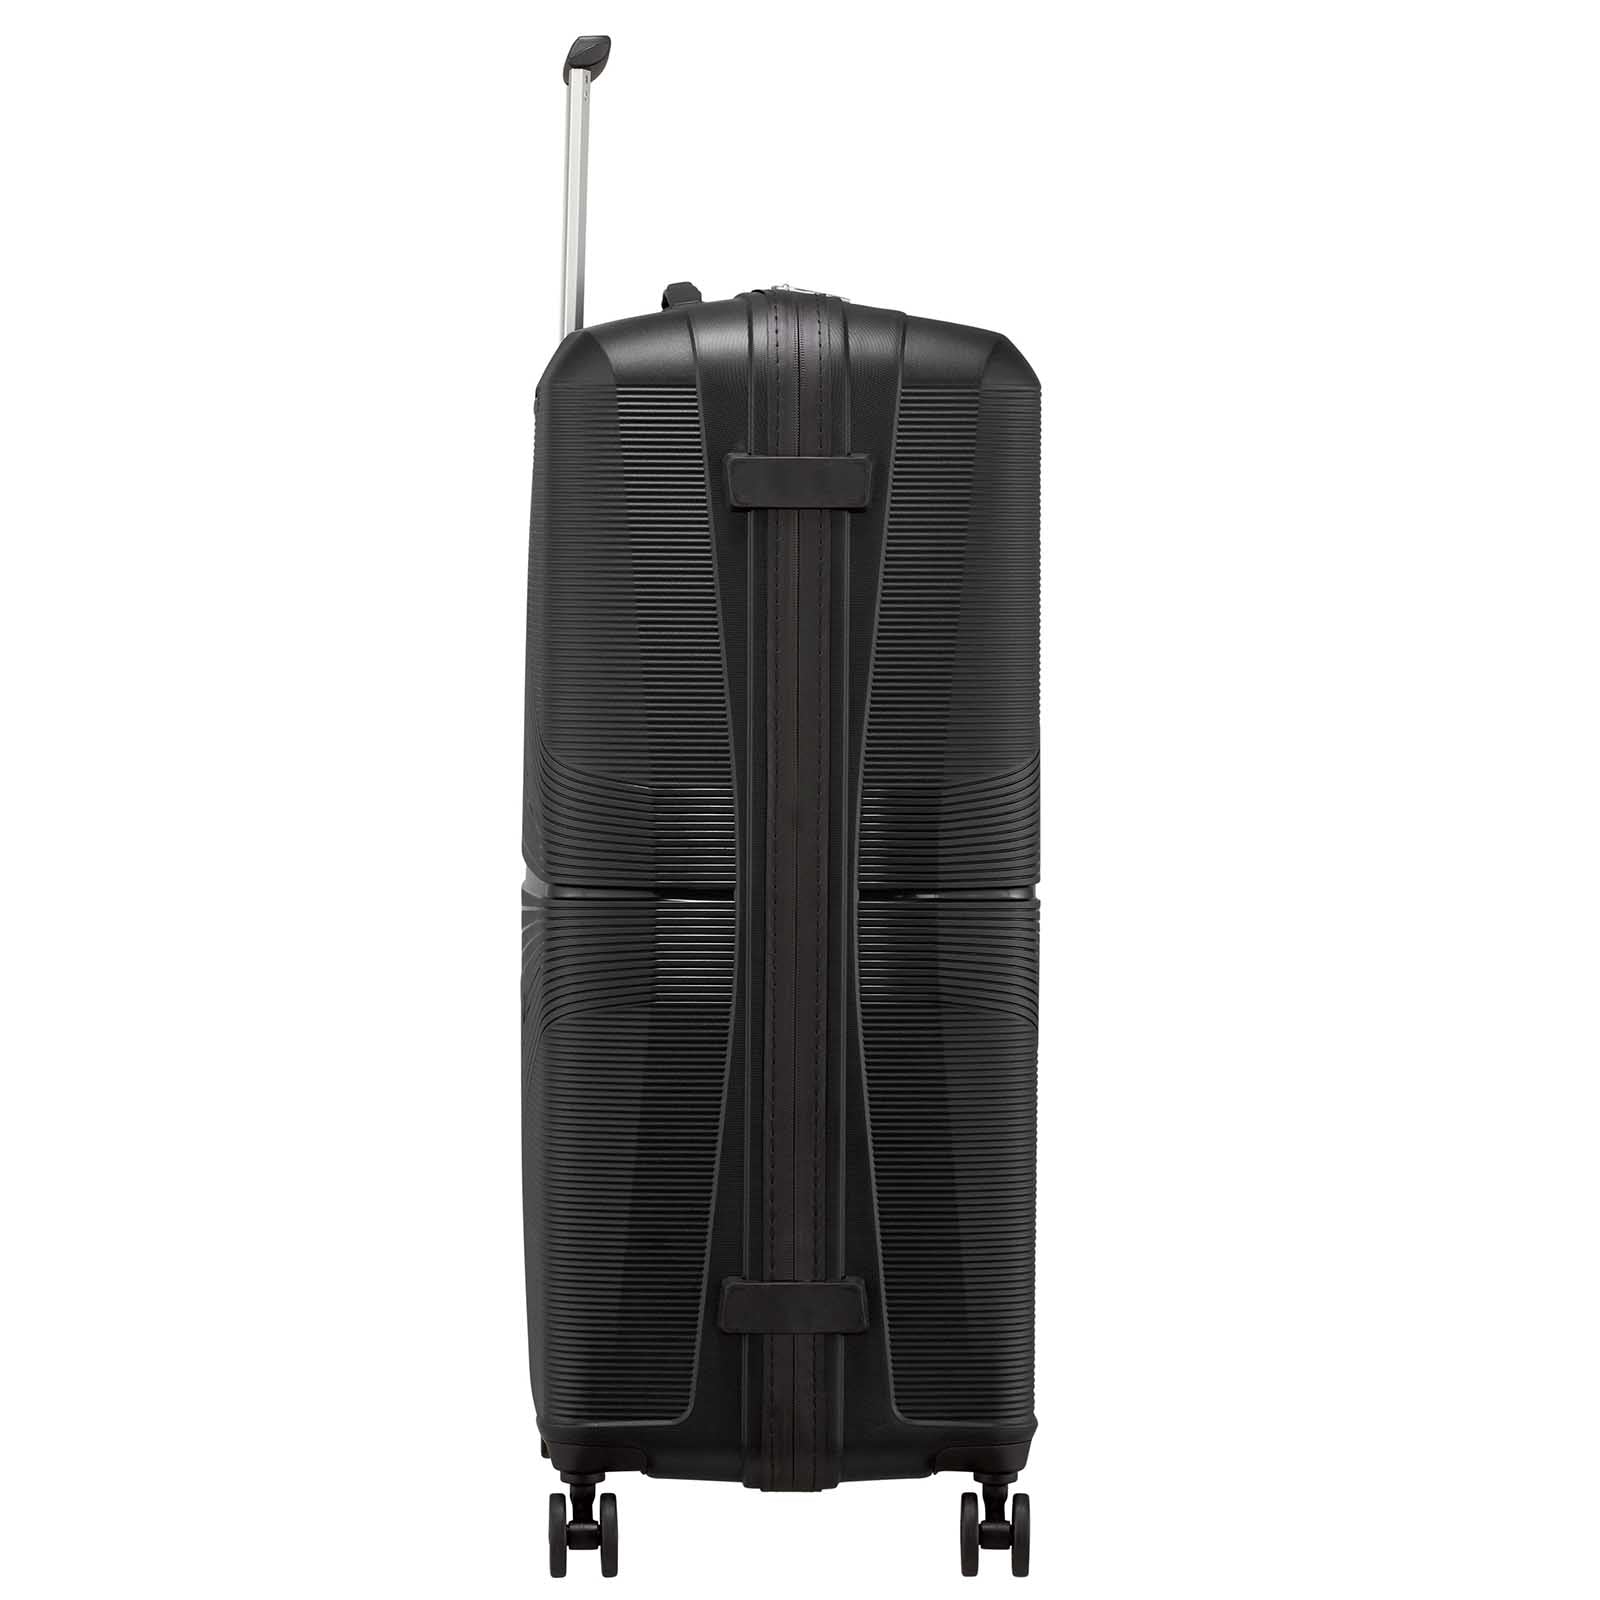 American-Tourister-Airconic-77cm-Suitcase-Onyx-Black-Side